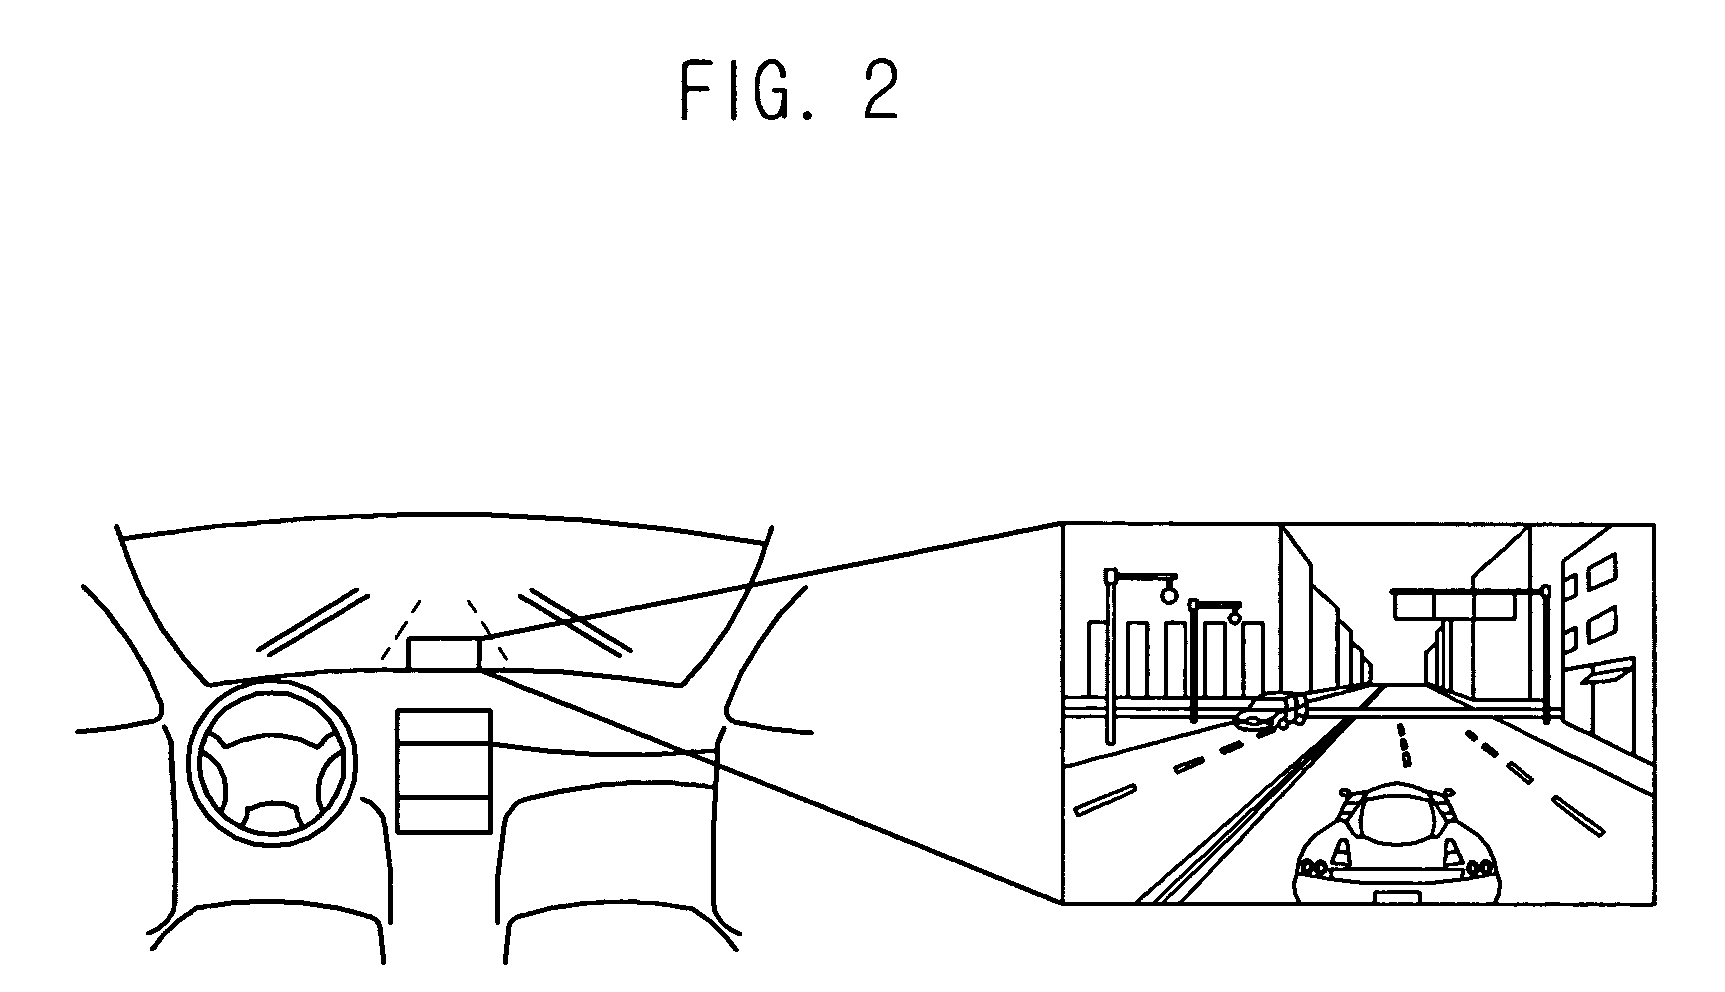 System for providing 3-dimensional vehicle information with predetermined viewpoint, and method thereof